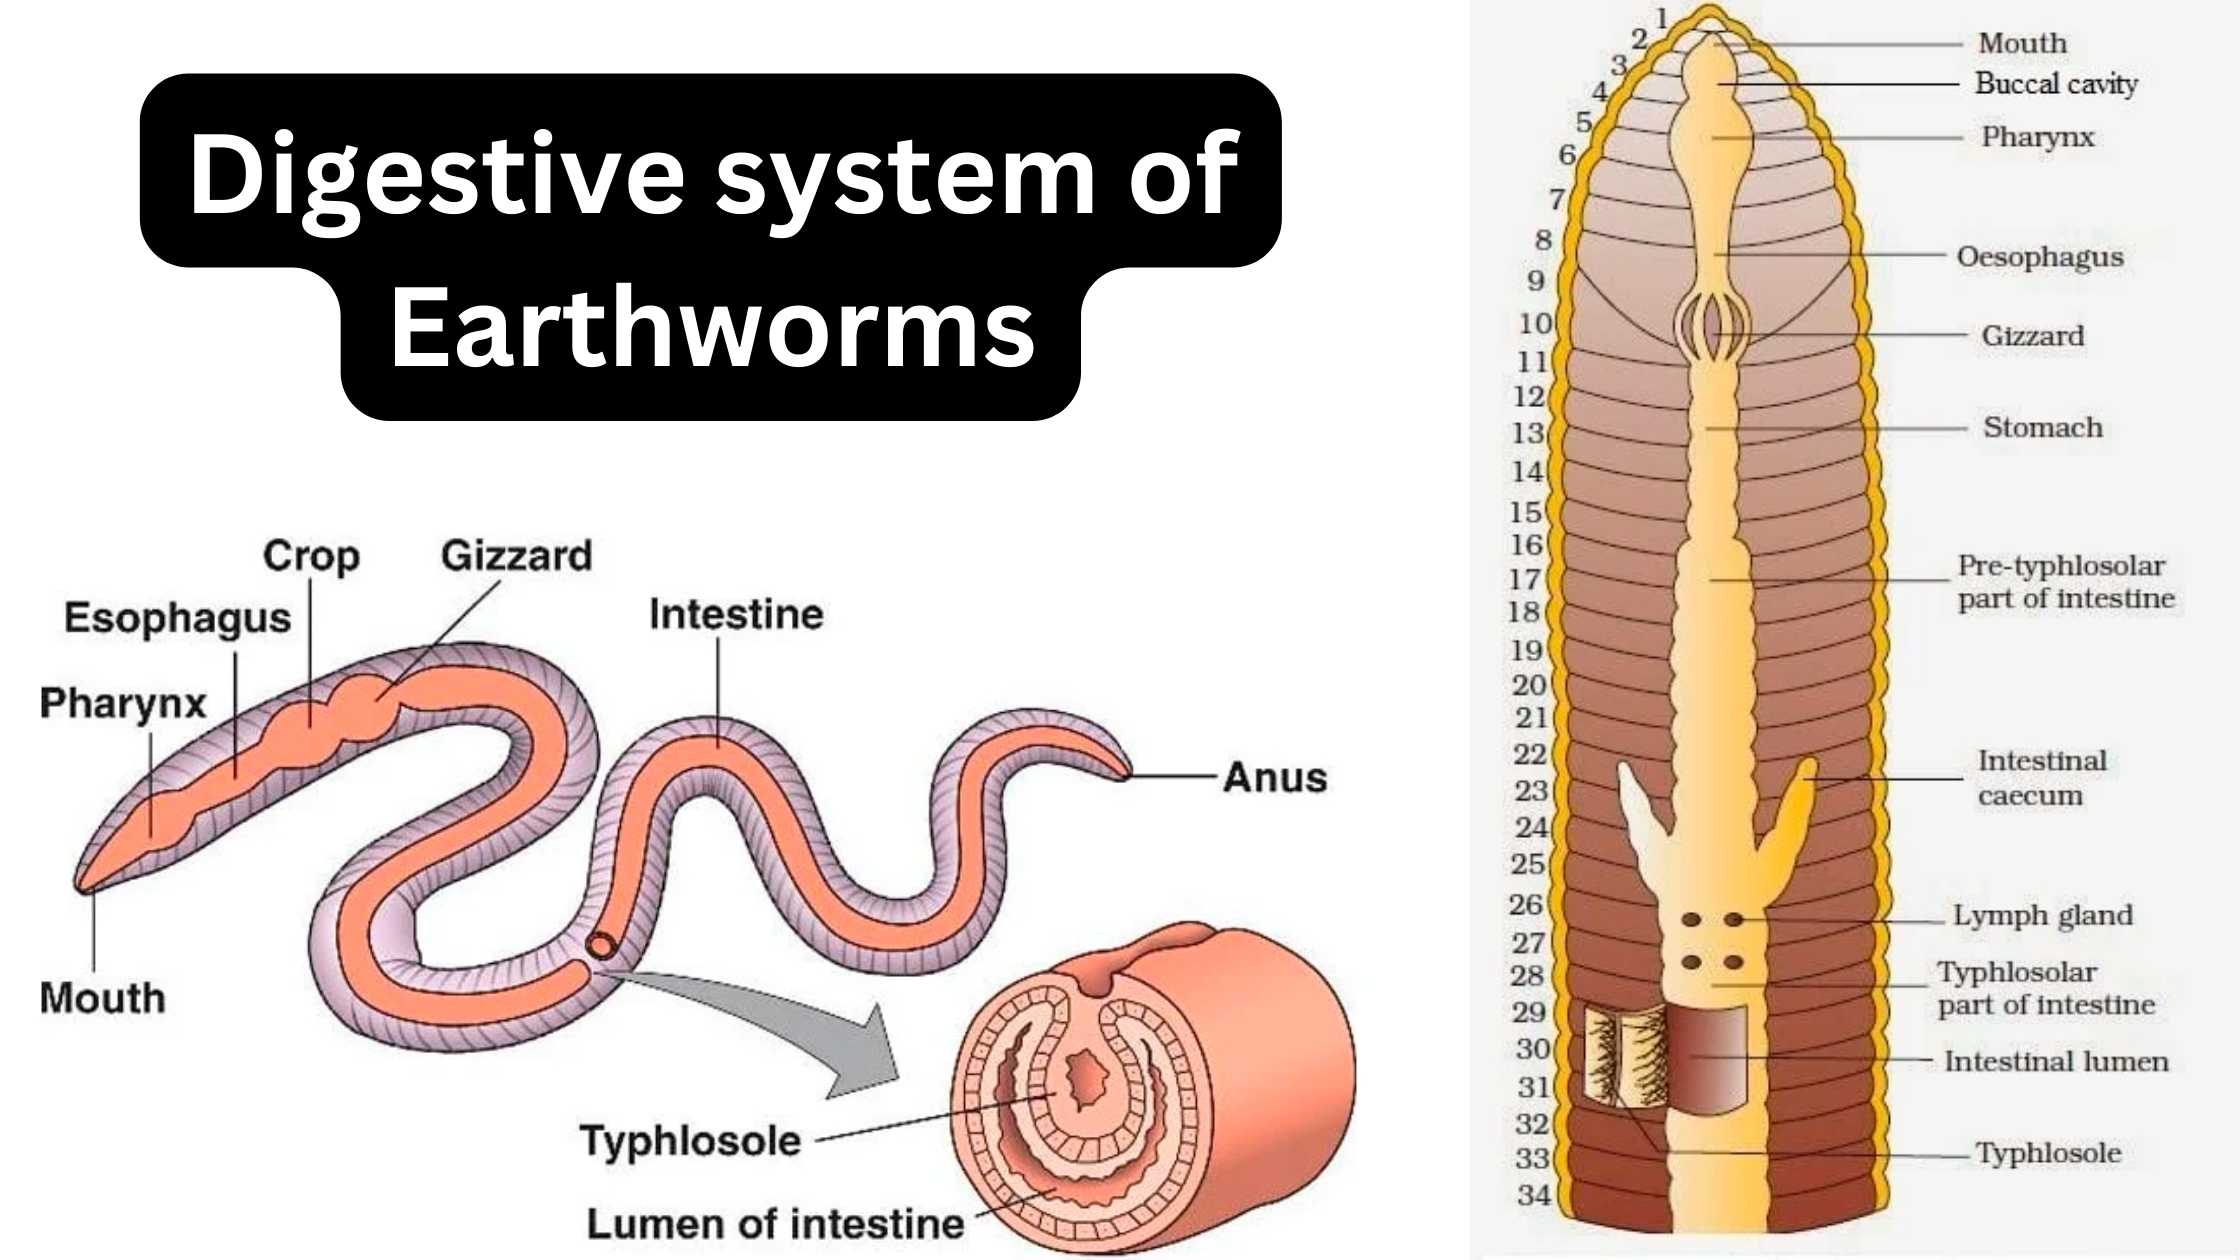 Digestive system of Earthworms